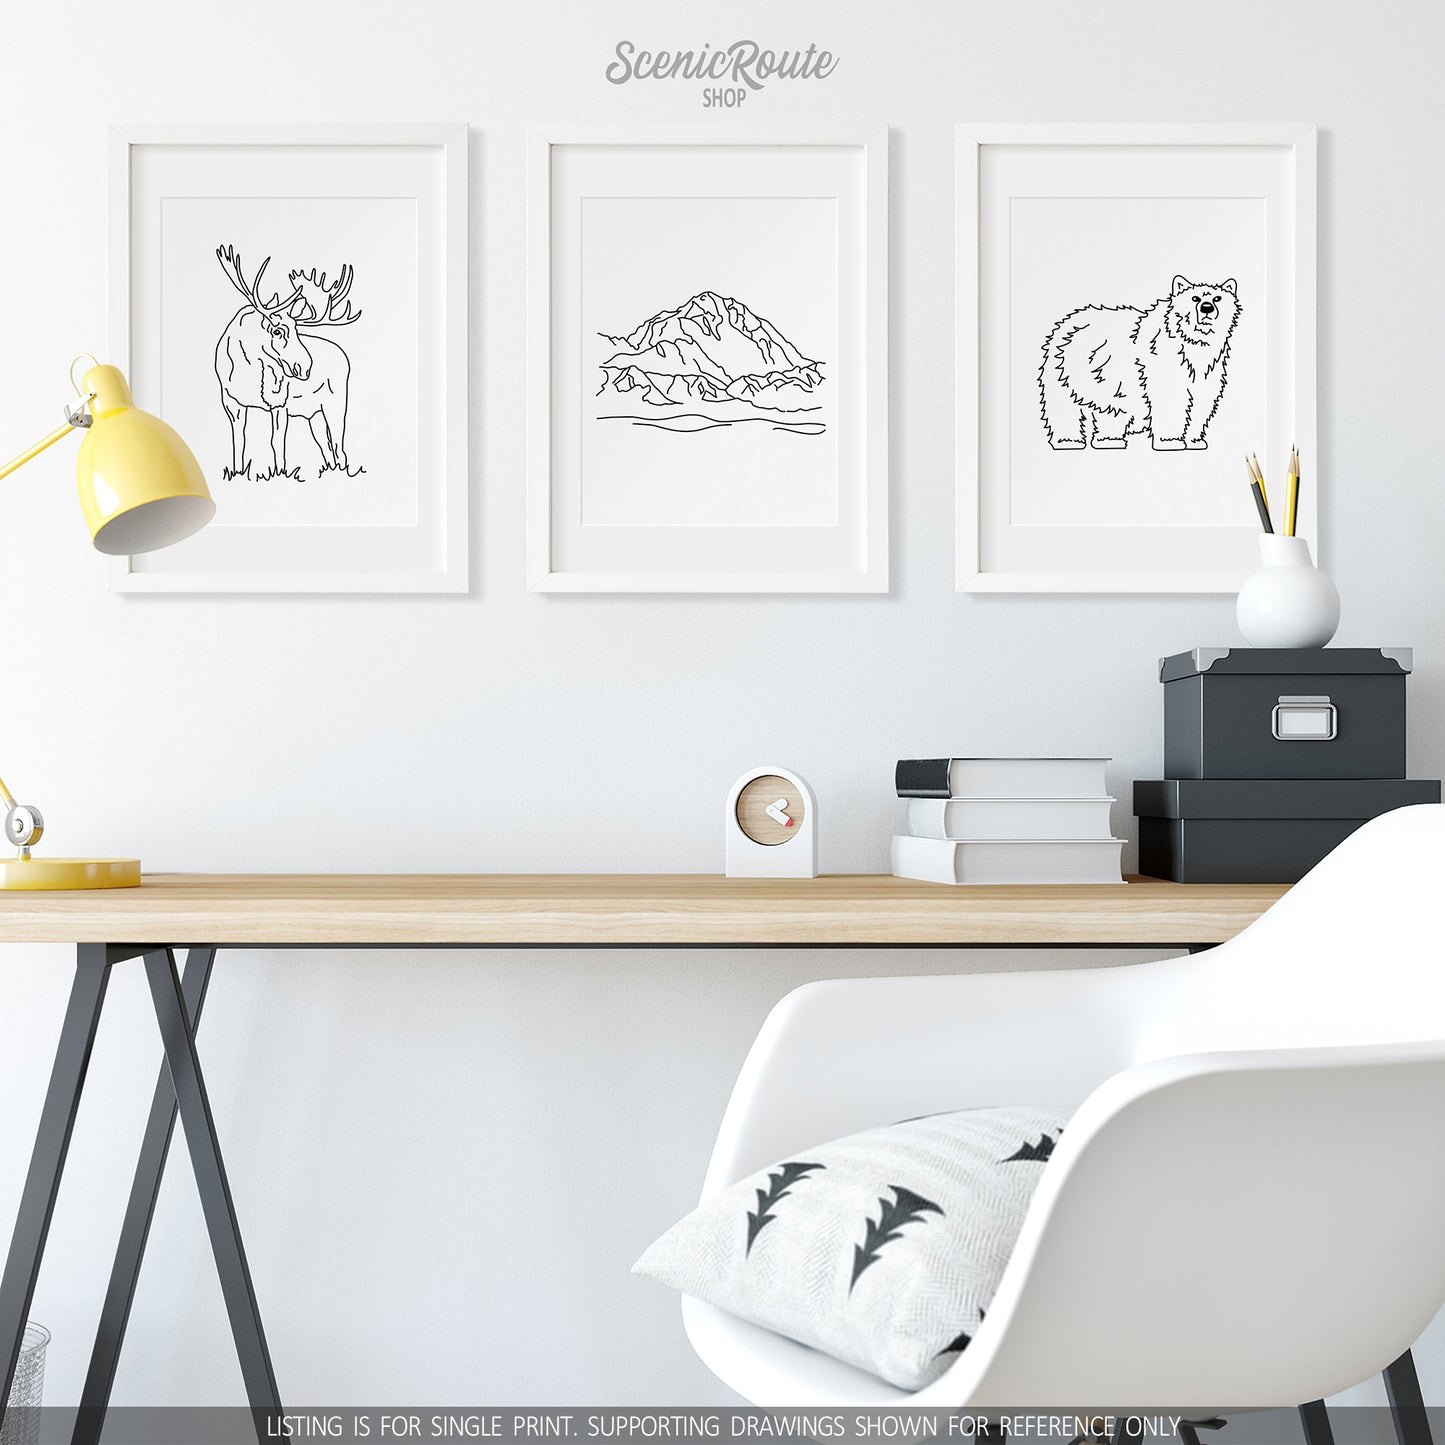 A group of three framed drawings on a wall above a desk. The line art drawings include a Moose, Denali National Park, and a Grizzly Bear